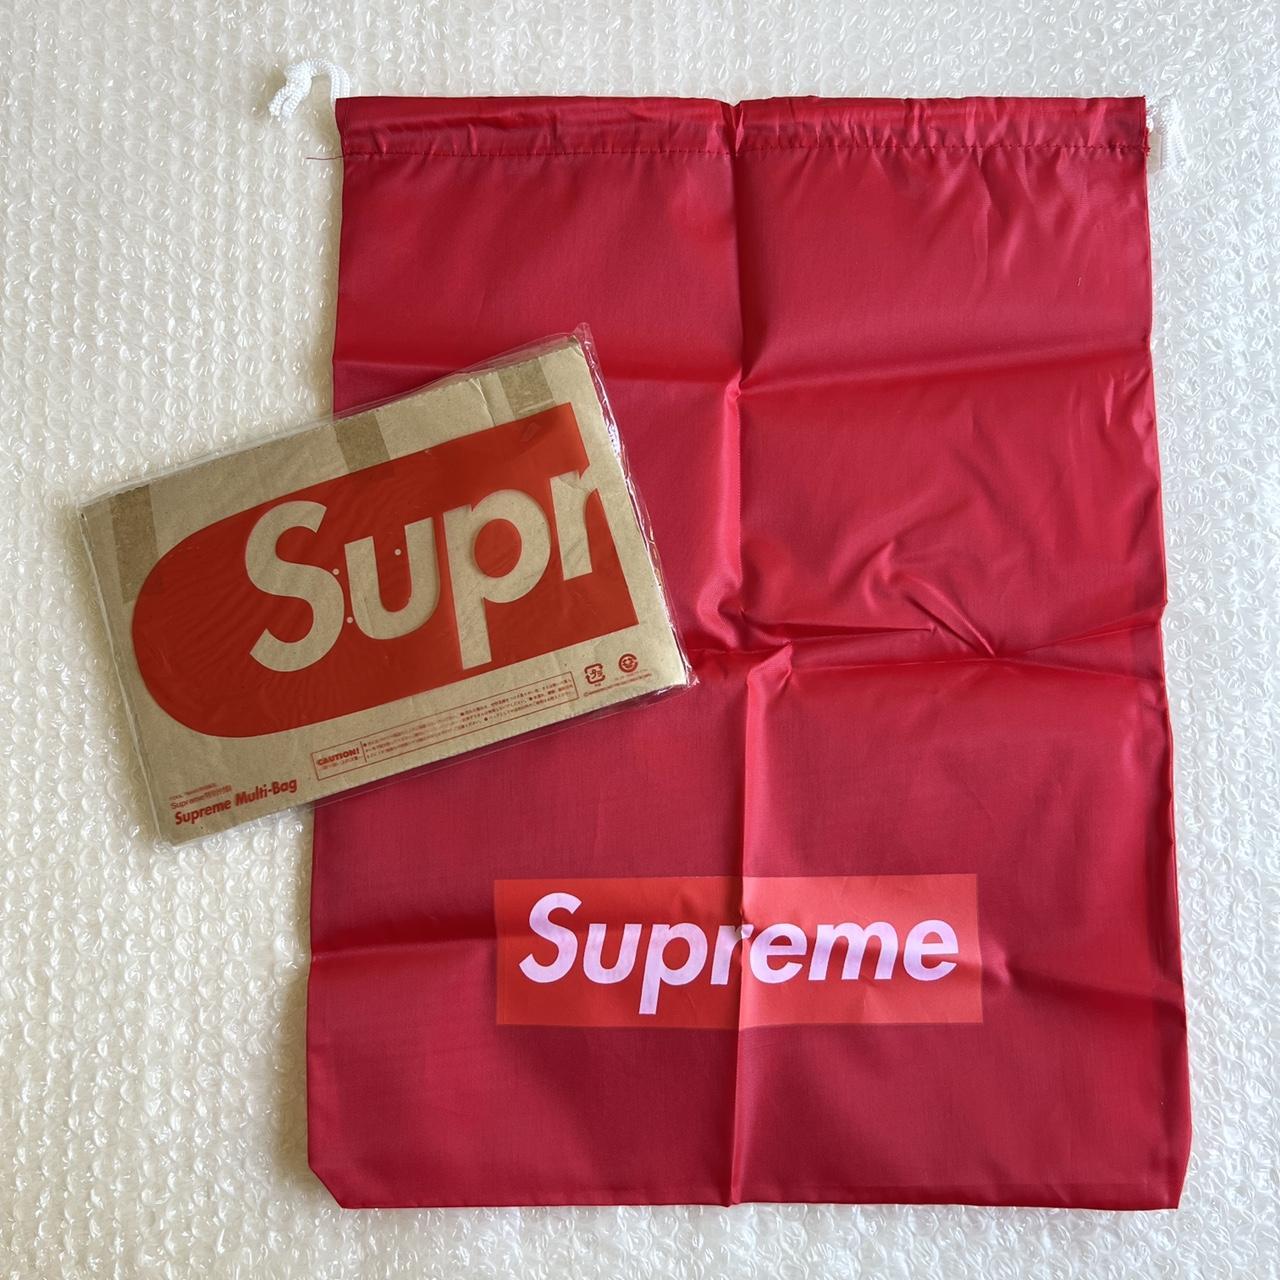 BRAND NEW Supreme backpack Was a gift just never - Depop